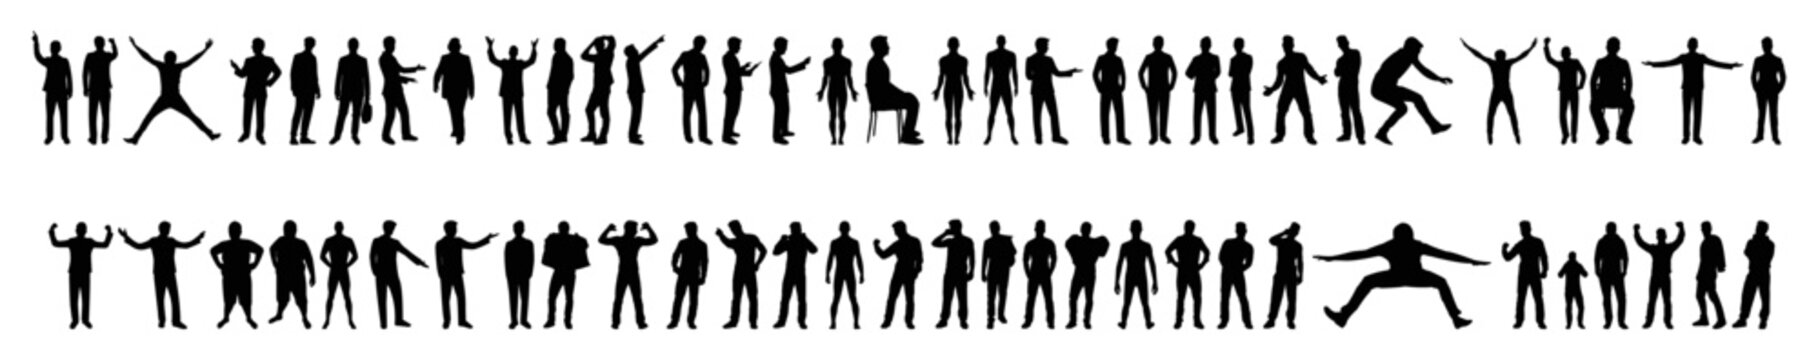 A set of people silhouettes with various styles